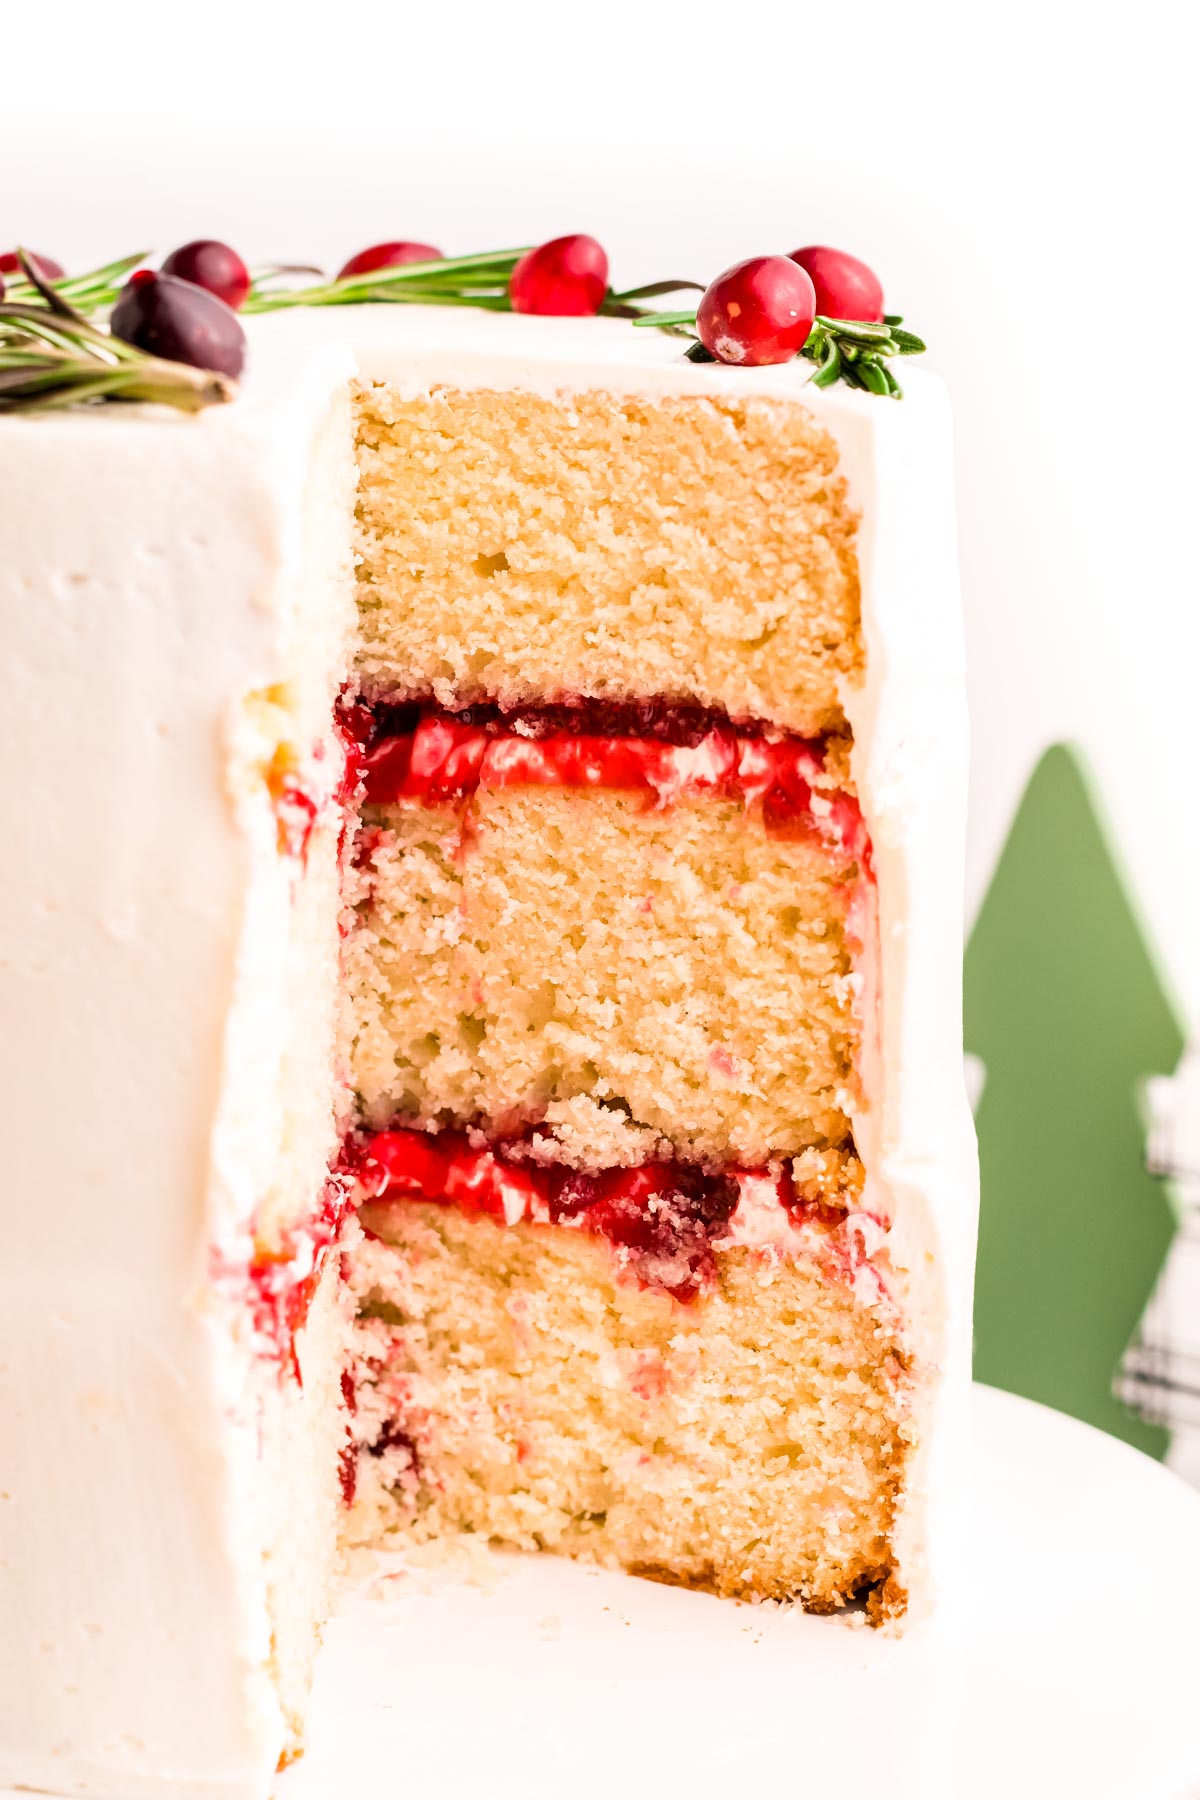 Layered Cranberry Cake with Buttercream Frosting - Carlsbad Cravings